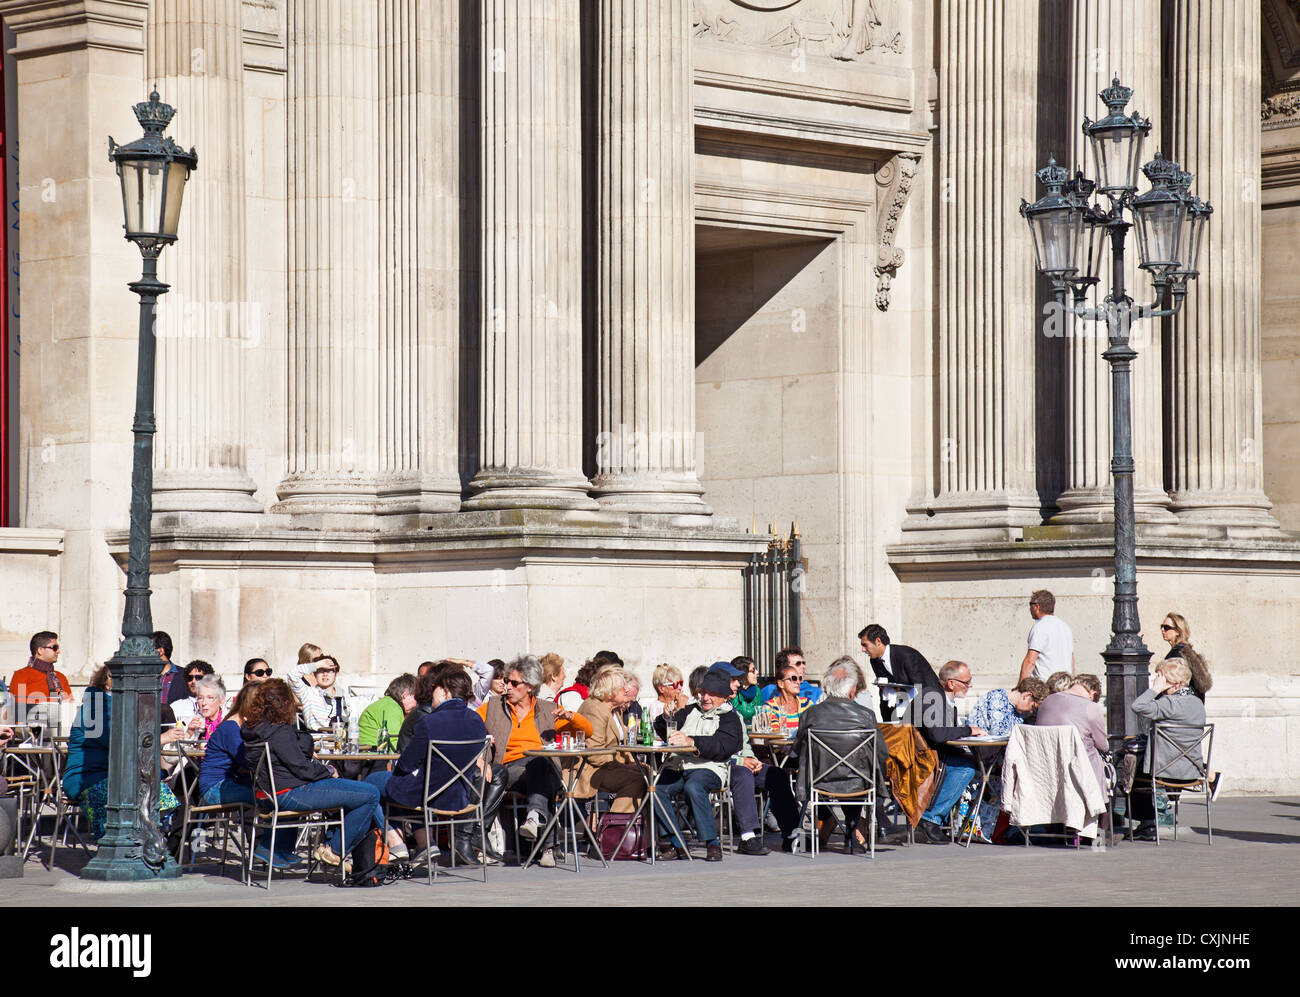 Visitors to the Musée du Louvre, Paris, France, eating, drinking and chatting in the museum's courtyard cafe. Stock Photo